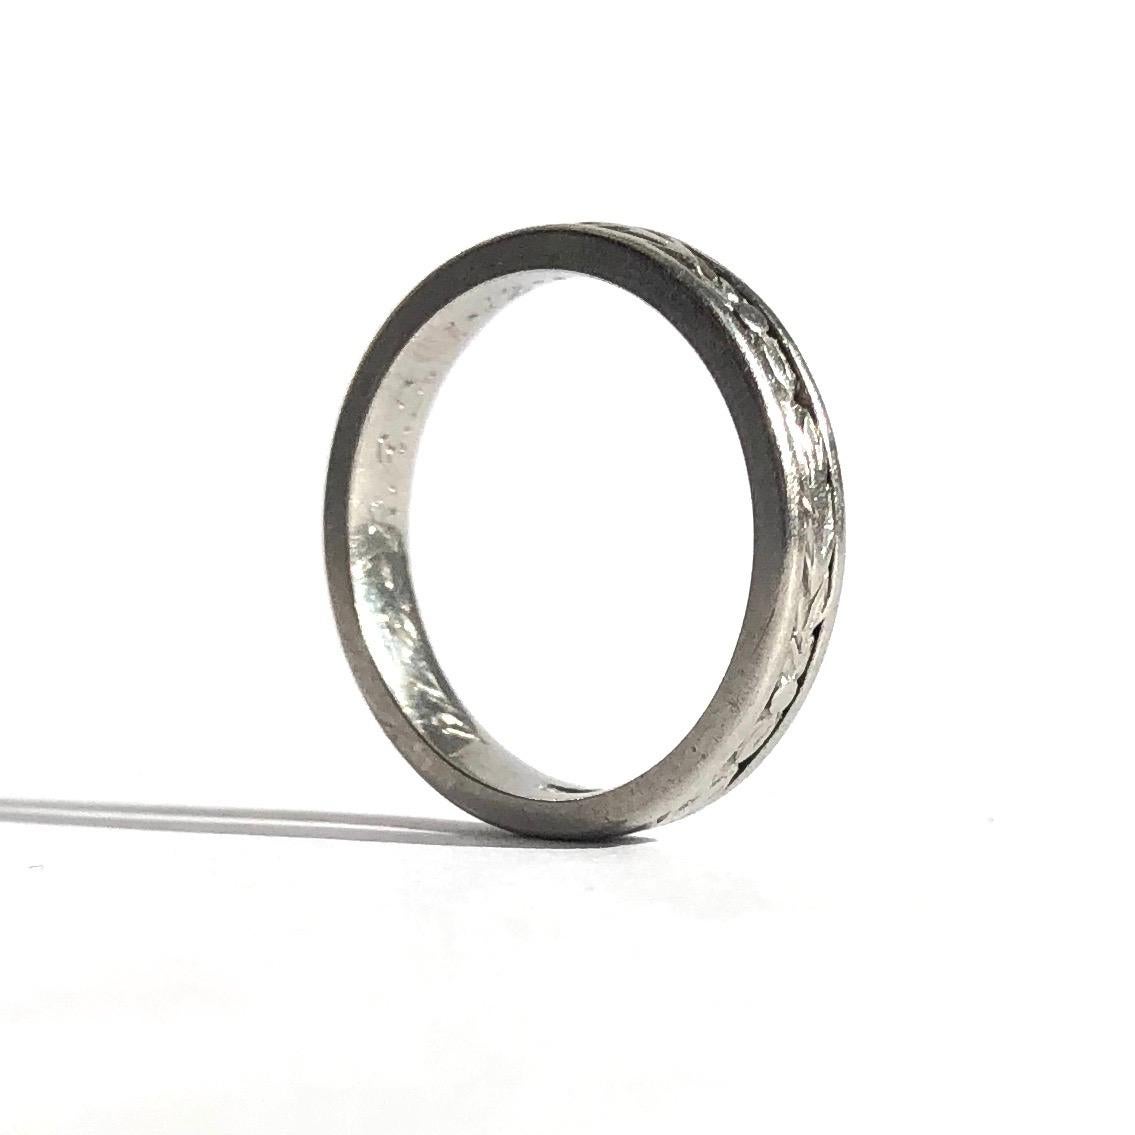 This decorative platinum band holds deep moulded leaf style detail that is framed by a solid line each side all around the band. There is an inscription inside the band which reads 'D.L.C - R.E.S 1.12.52'

Ring Size: J 1/2 or 5
Band Width: